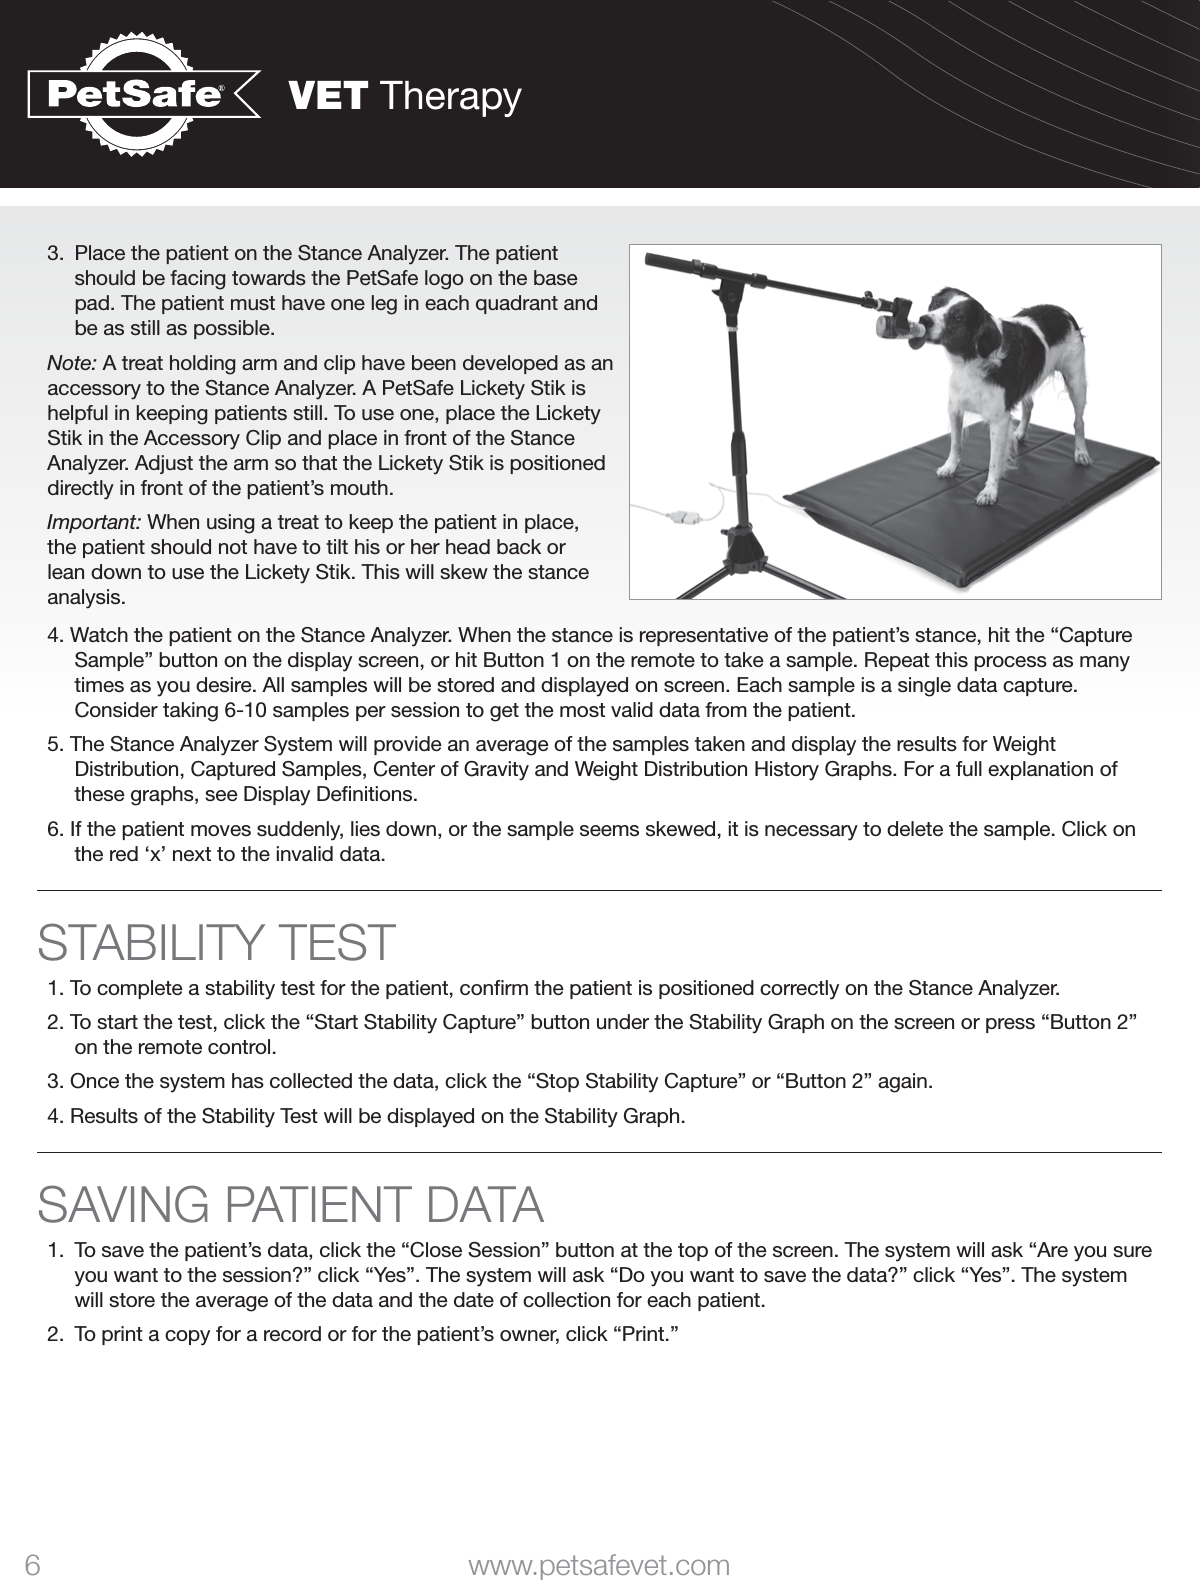 VET Therapy6 www.petsafevet.com3.  Place the patient on the Stance Analyzer. The patient should be facing towards the PetSafe logo on the base pad. The patient must have one leg in each quadrant and be as still as possible. Note: A treat holding arm and clip have been developed as an accessory to the Stance Analyzer. A PetSafe Lickety Stik is helpful in keeping patients still. To use one, place the Lickety Stik in the Accessory Clip and place in front of the Stance Analyzer. Adjust the arm so that the Lickety Stik is positioned directly in front of the patient’s mouth. Important: When using a treat to keep the patient in place, the patient should not have to tilt his or her head back or lean down to use the Lickety Stik. This will skew the stance analysis. 4. Watch the patient on the Stance Analyzer. When the stance is representative of the patient’s stance, hit the “Capture Sample” button on the display screen, or hit Button 1 on the remote to take a sample. Repeat this process as many times as you desire. All samples will be stored and displayed on screen. Each sample is a single data capture. Consider taking 6-10 samples per session to get the most valid data from the patient. 5. The Stance Analyzer System will provide an average of the samples taken and display the results for Weight Distribution, Captured Samples, Center of Gravity and Weight Distribution History Graphs. For a full explanation of these graphs, see Display Deﬁnitions. 6. If the patient moves suddenly, lies down, or the sample seems skewed, it is necessary to delete the sample. Click on the red ‘x’ next to the invalid data.STABILITY TEST1. To complete a stability test for the patient, conﬁrm the patient is positioned correctly on the Stance Analyzer. 2. To start the test, click the “Start Stability Capture” button under the Stability Graph on the screen or press “Button 2” on the remote control. 3. Once the system has collected the data, click the “Stop Stability Capture” or “Button 2” again. 4. Results of the Stability Test will be displayed on the Stability Graph. SAVING PATIENT DATA1.  To save the patient’s data, click the “Close Session” button at the top of the screen. The system will ask “Are you sure you want to the session?” click “Yes”. The system will ask “Do you want to save the data?” click “Yes”. The system will store the average of the data and the date of collection for each patient. 2.  To print a copy for a record or for the patient’s owner, click “Print.” 